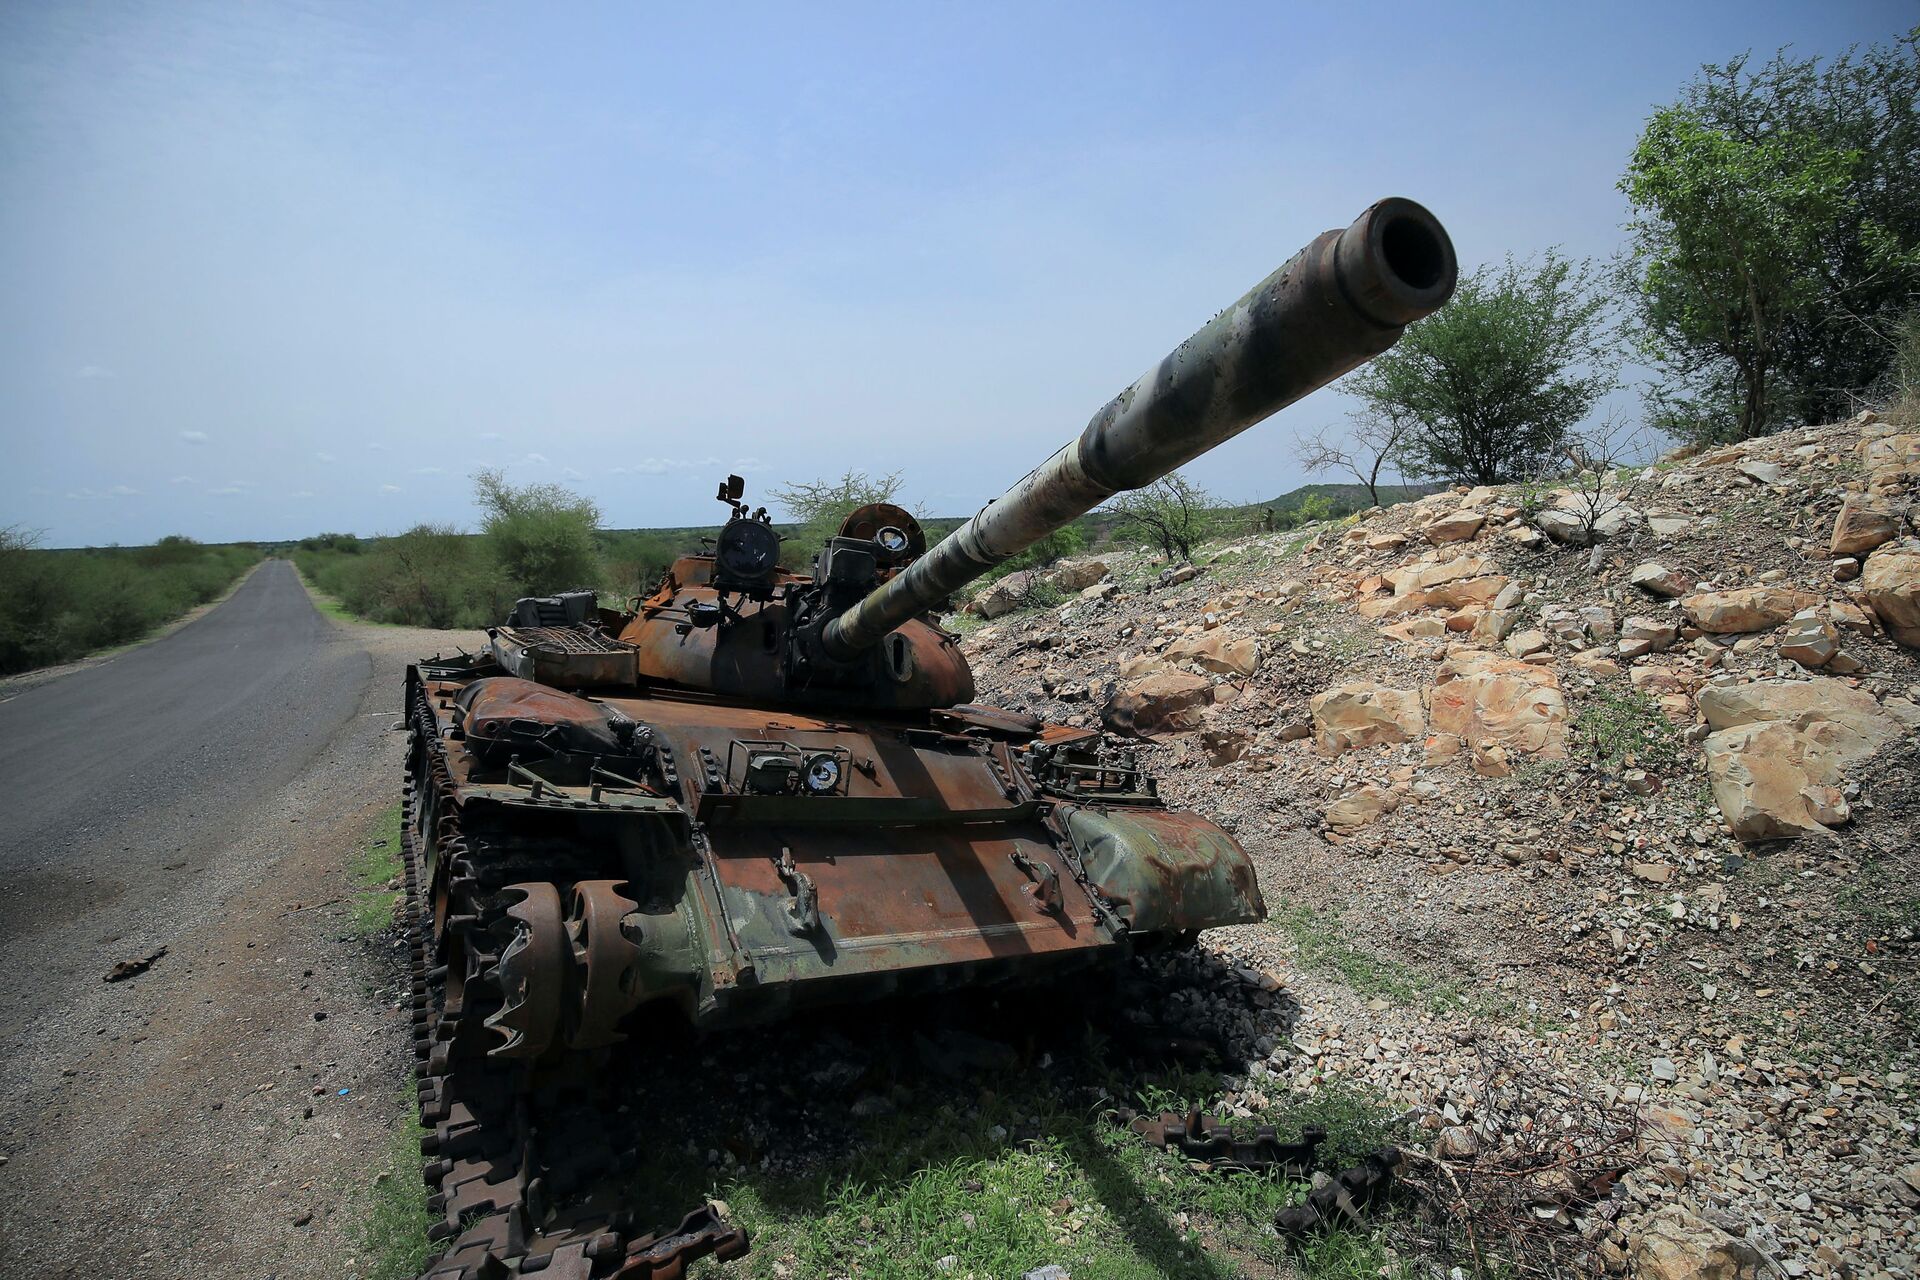 A tank damaged during the fighting between Ethiopia?s National Defense Force (ENDF) and Tigray Special Force stands on the outskirts of Humera town in Ethiopia July 1, 2021 Picture taken July 1, 2021 - Sputnik International, 1920, 17.09.2021